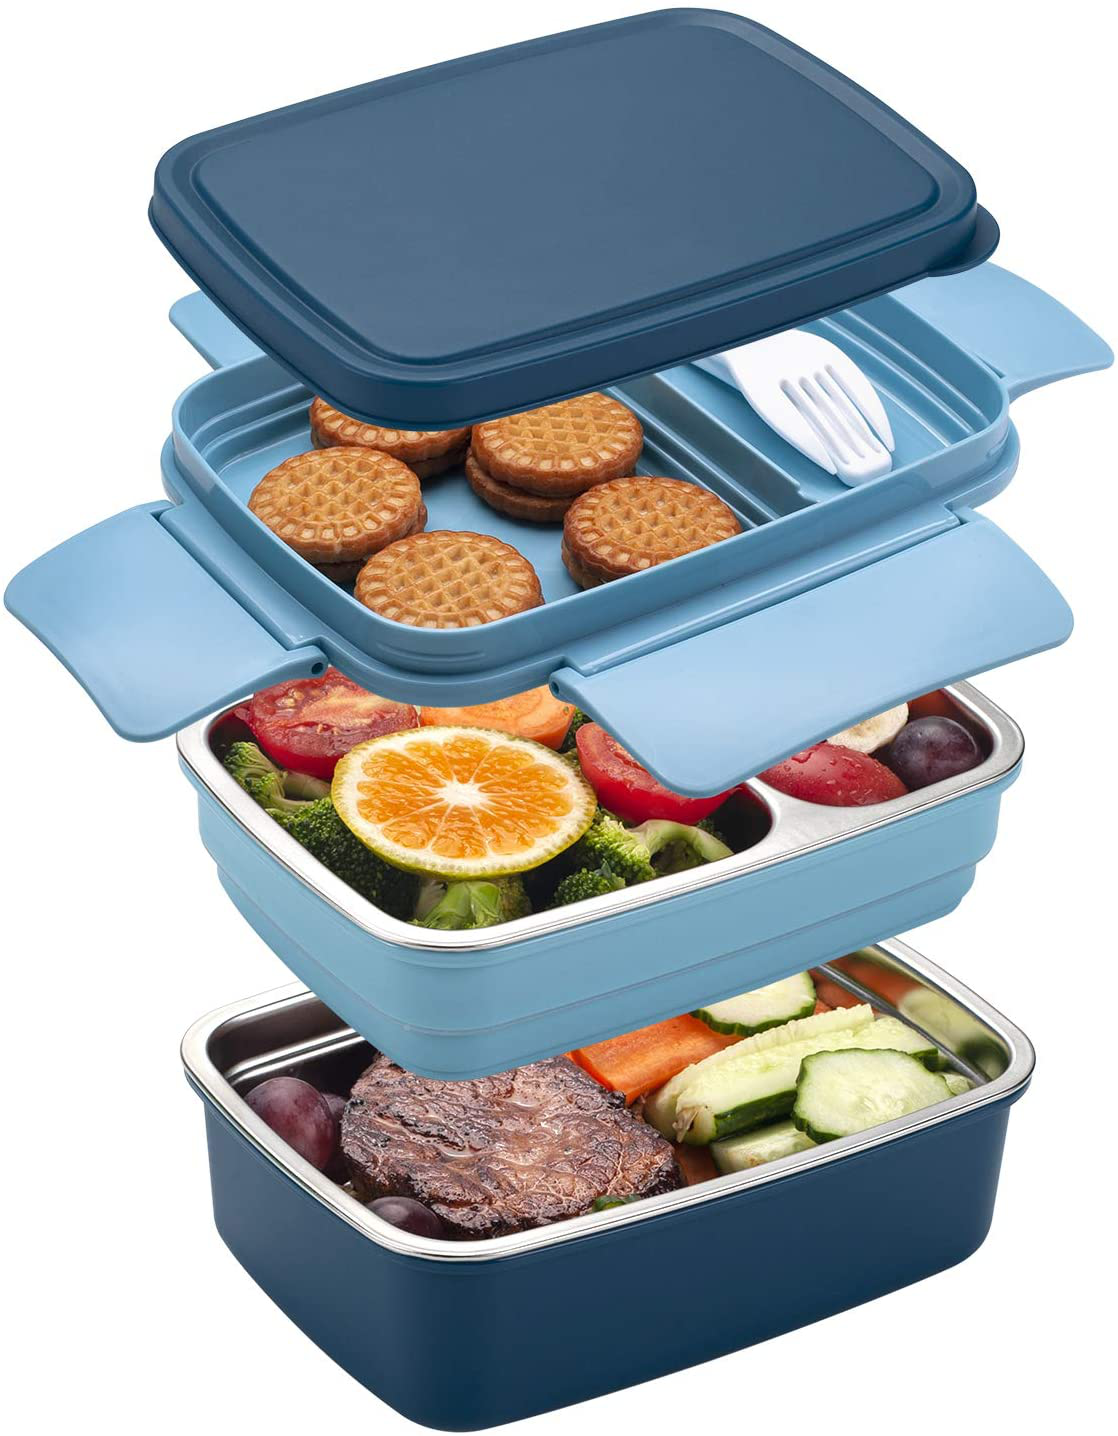 Freshmage Stainless Steel Bento Box for Adults & Kids, Leakproof Stackable Large Capacity Dishwasher Safe Lunch Container with Divided Compartments, Blue